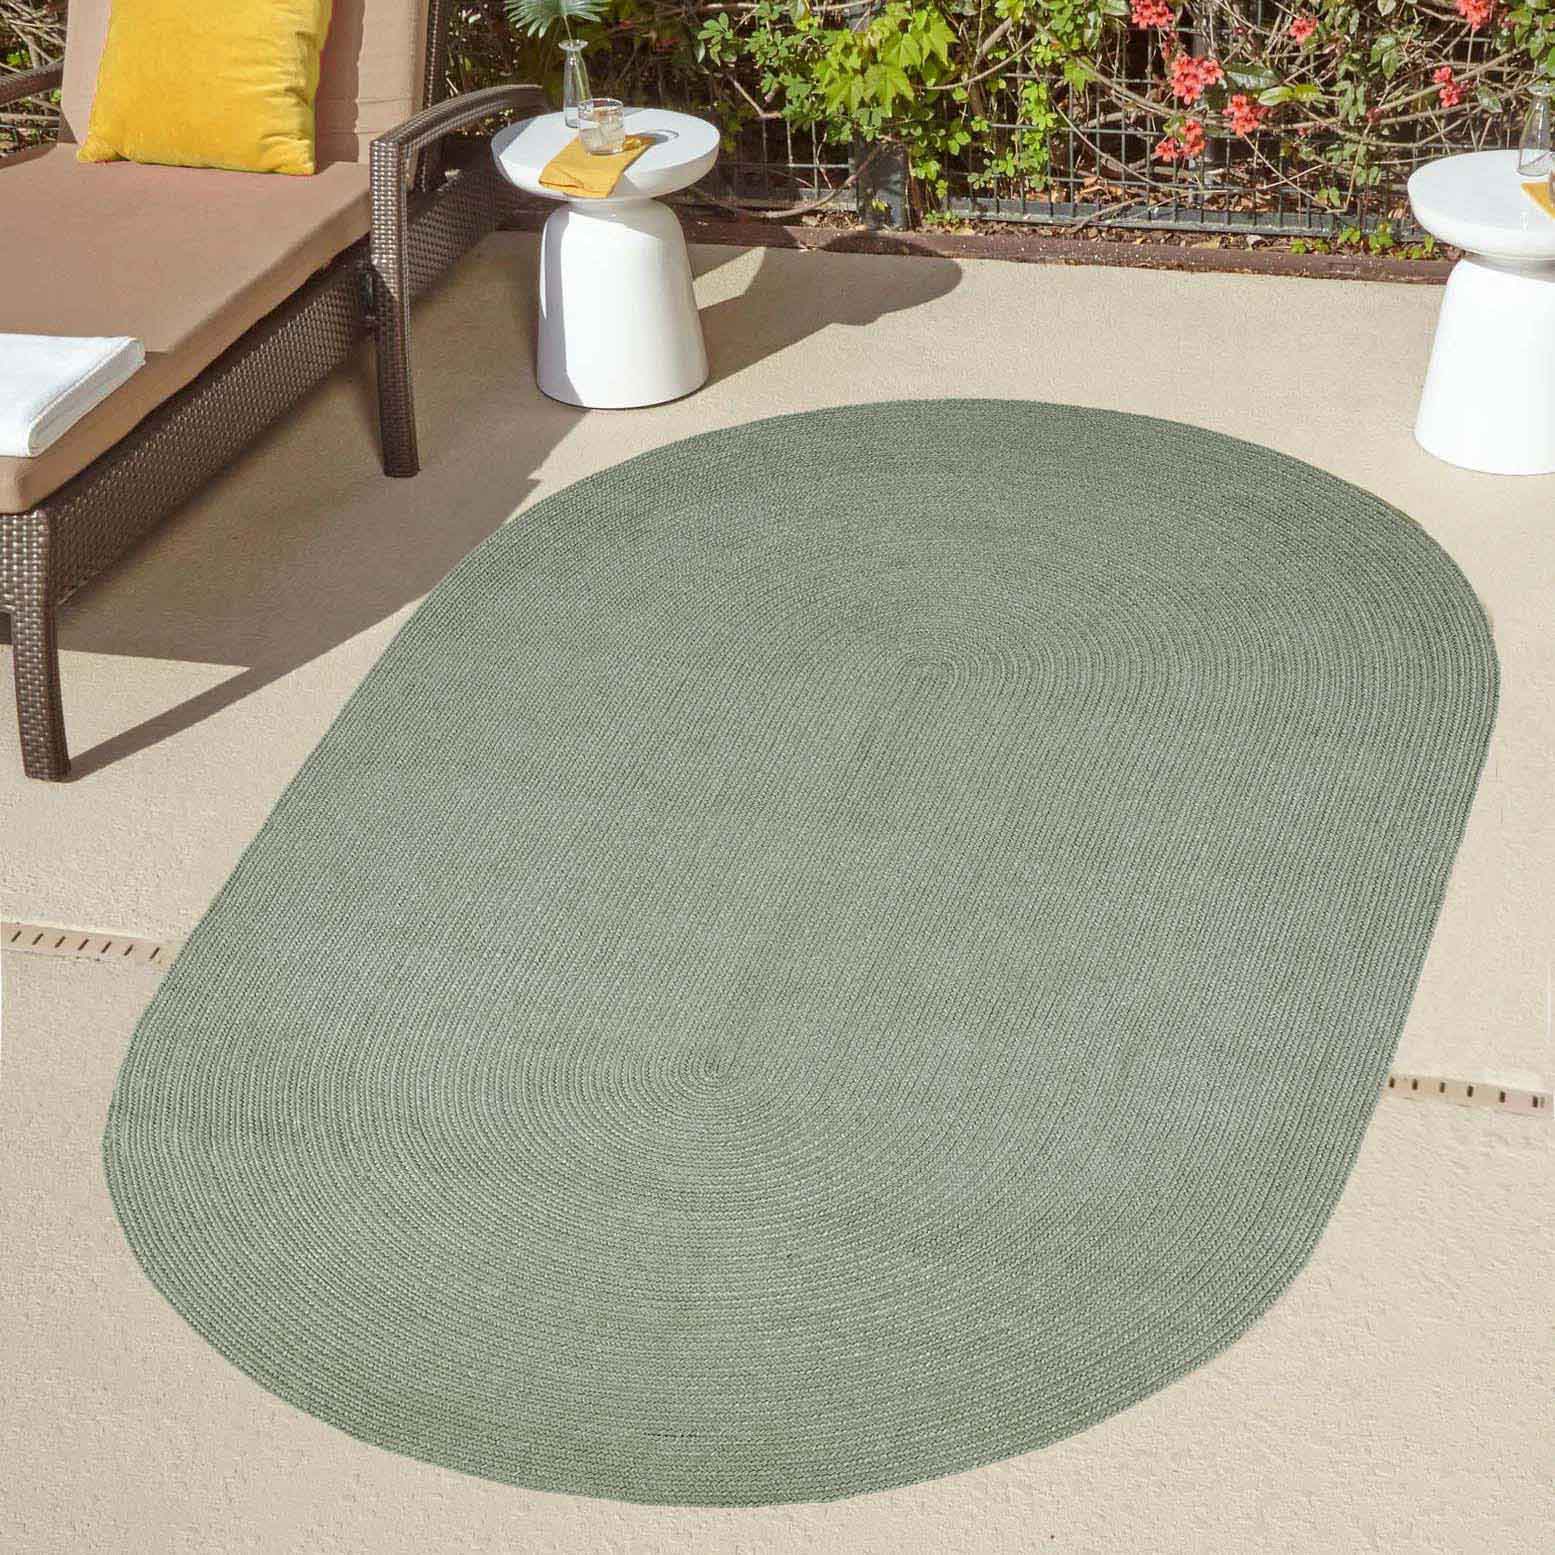 Classic Braided Weave Oval Area Rug Indoor Outdoor Rugs - FogGreen